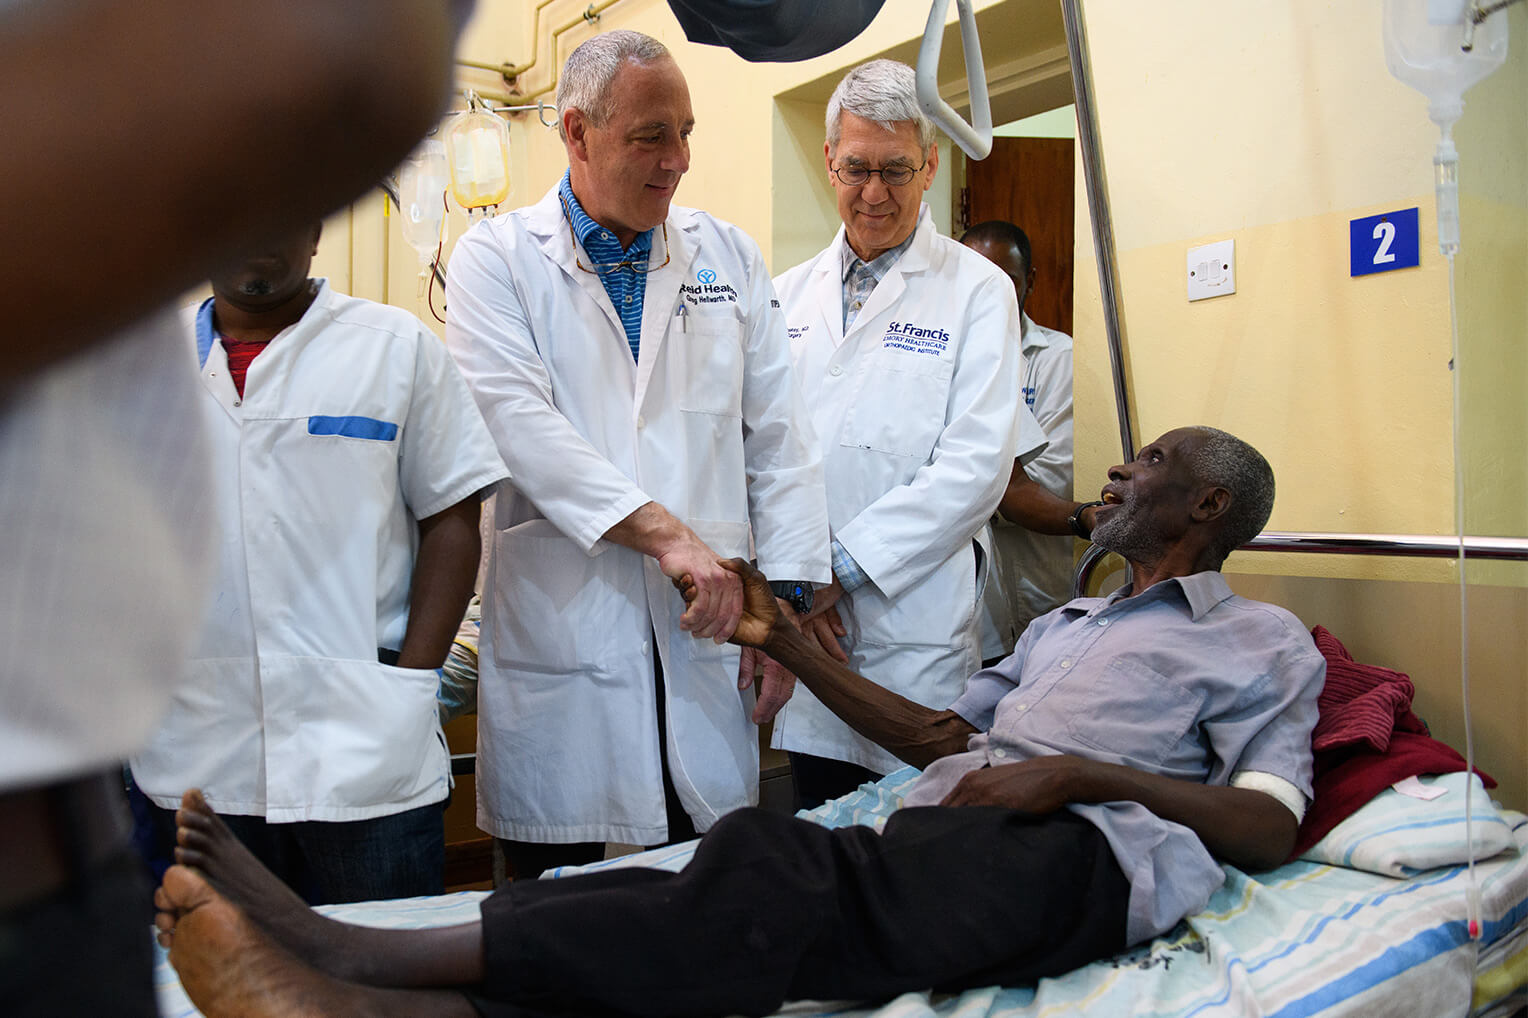 Drs Hellwarth, left, and McCluskey, right, visit Jephither following his successful surgery.